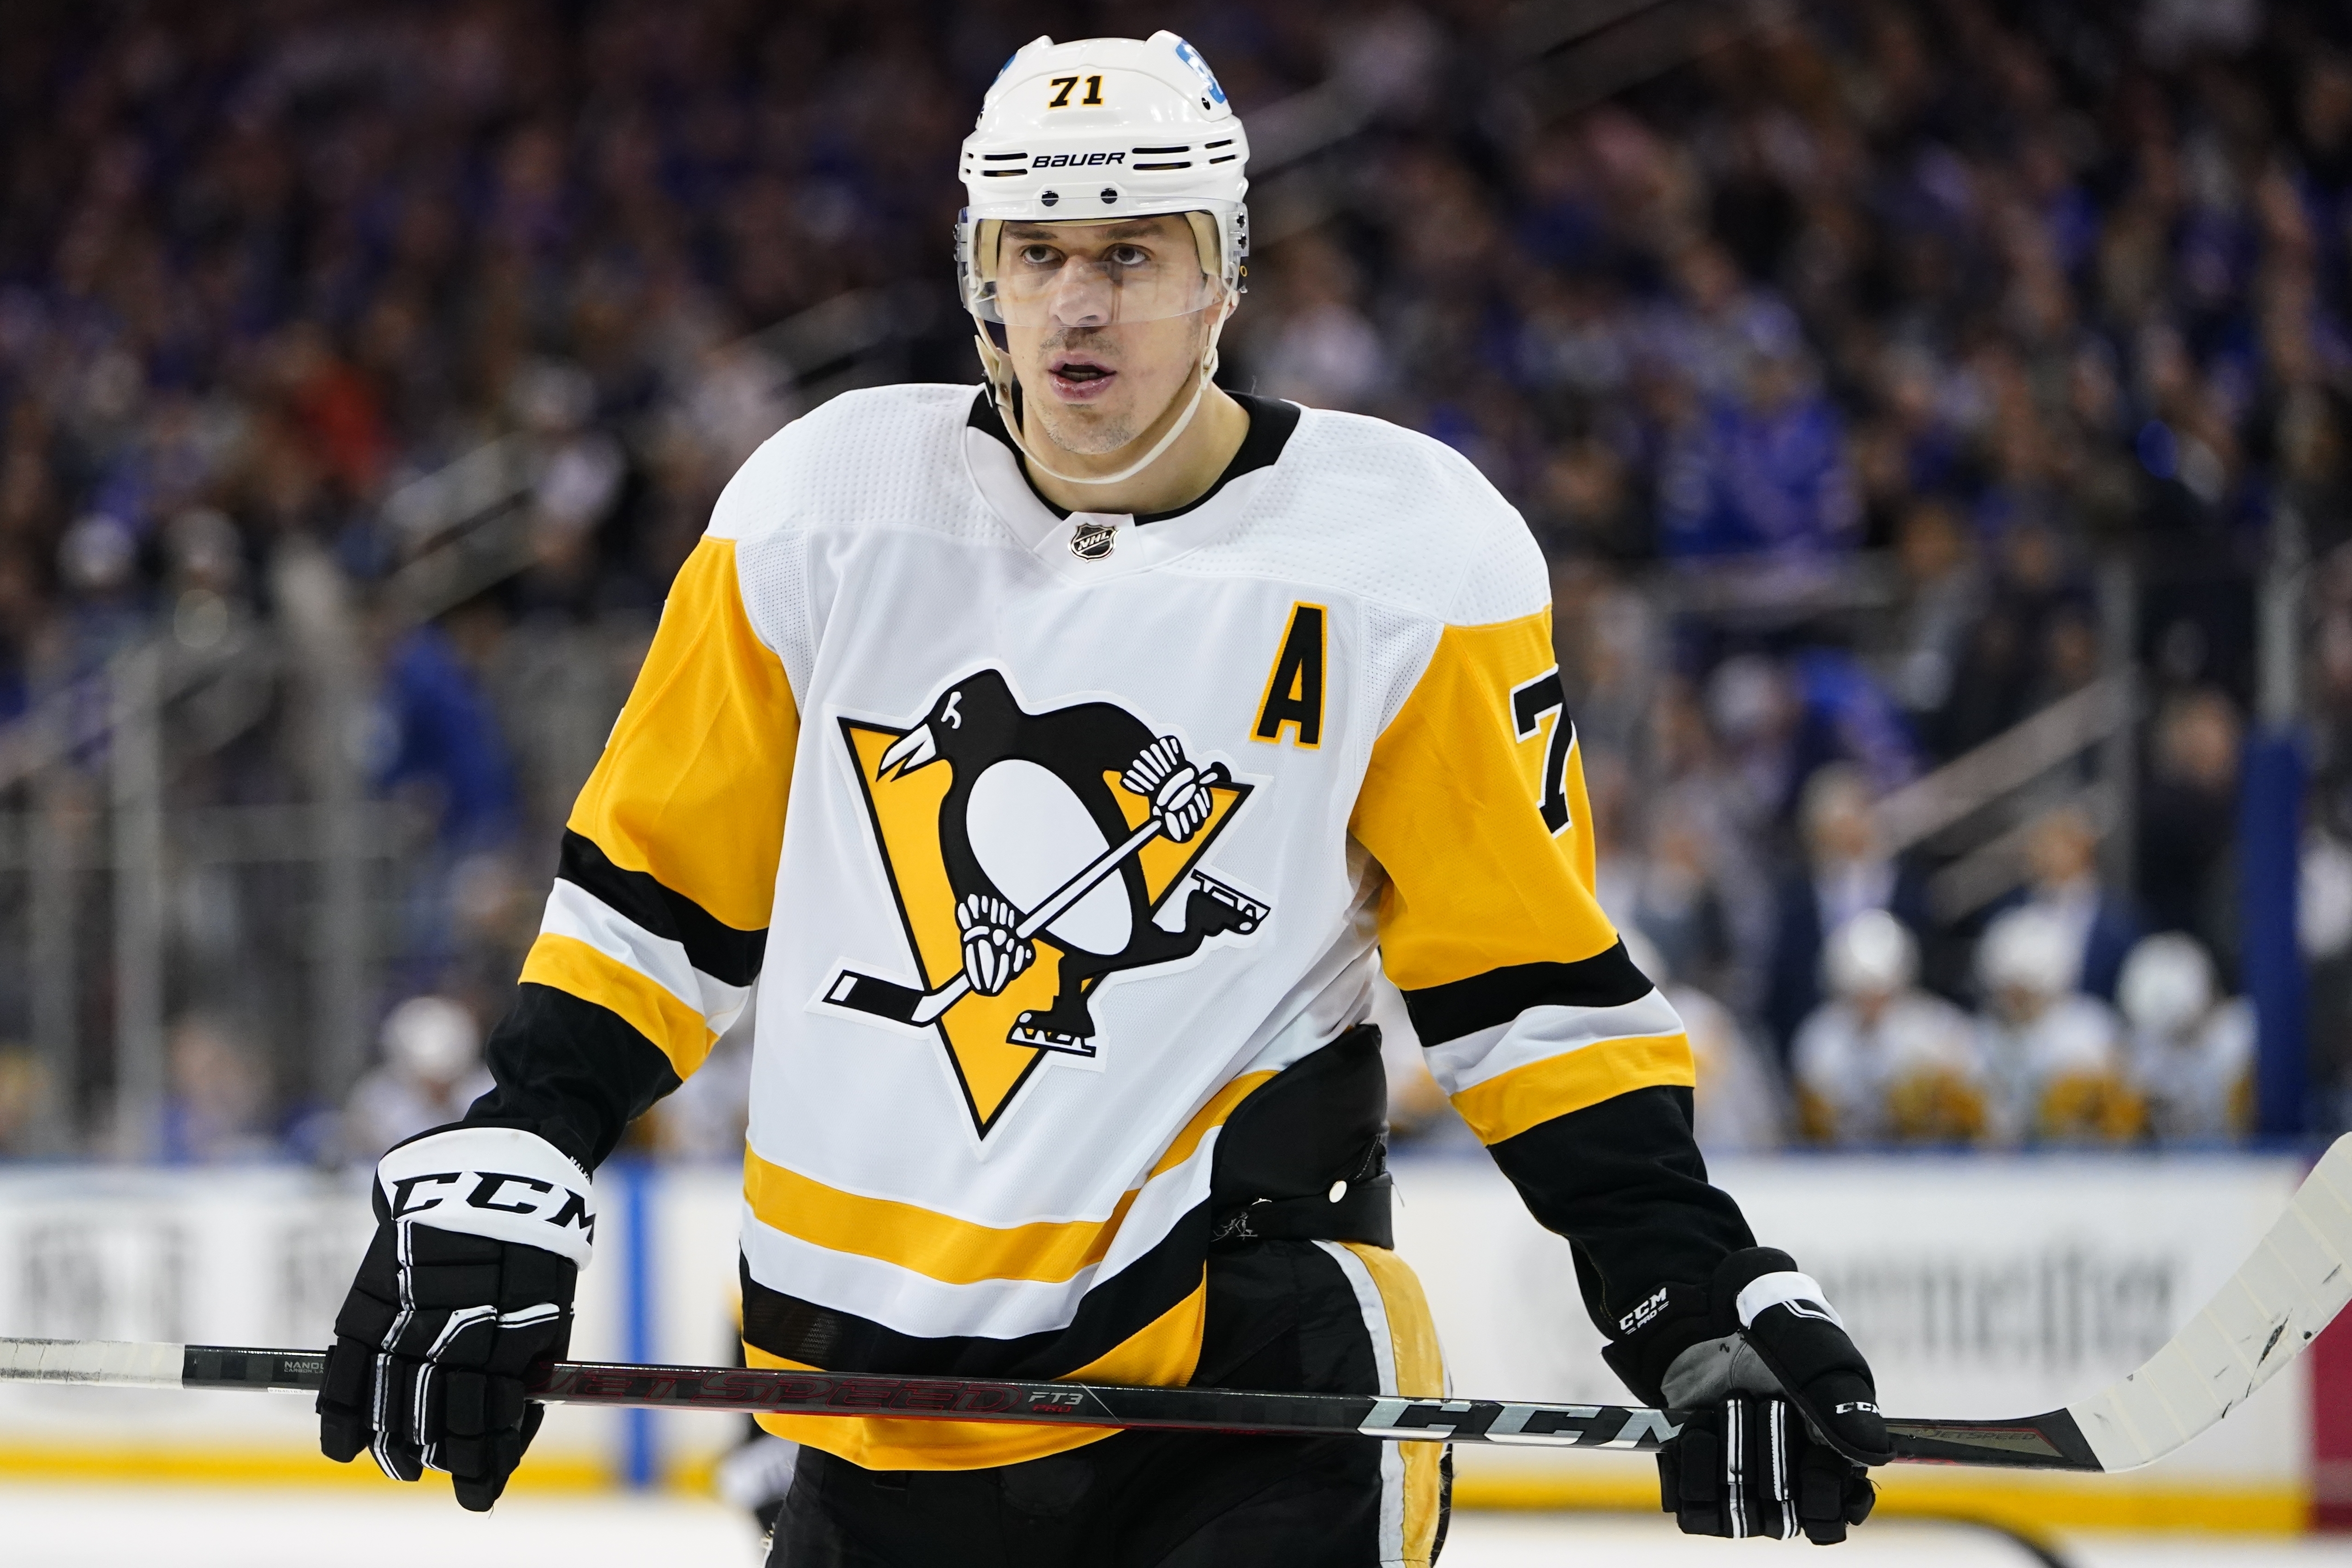 NHL Public Relations on X: Evgeni Malkin became the fourth player